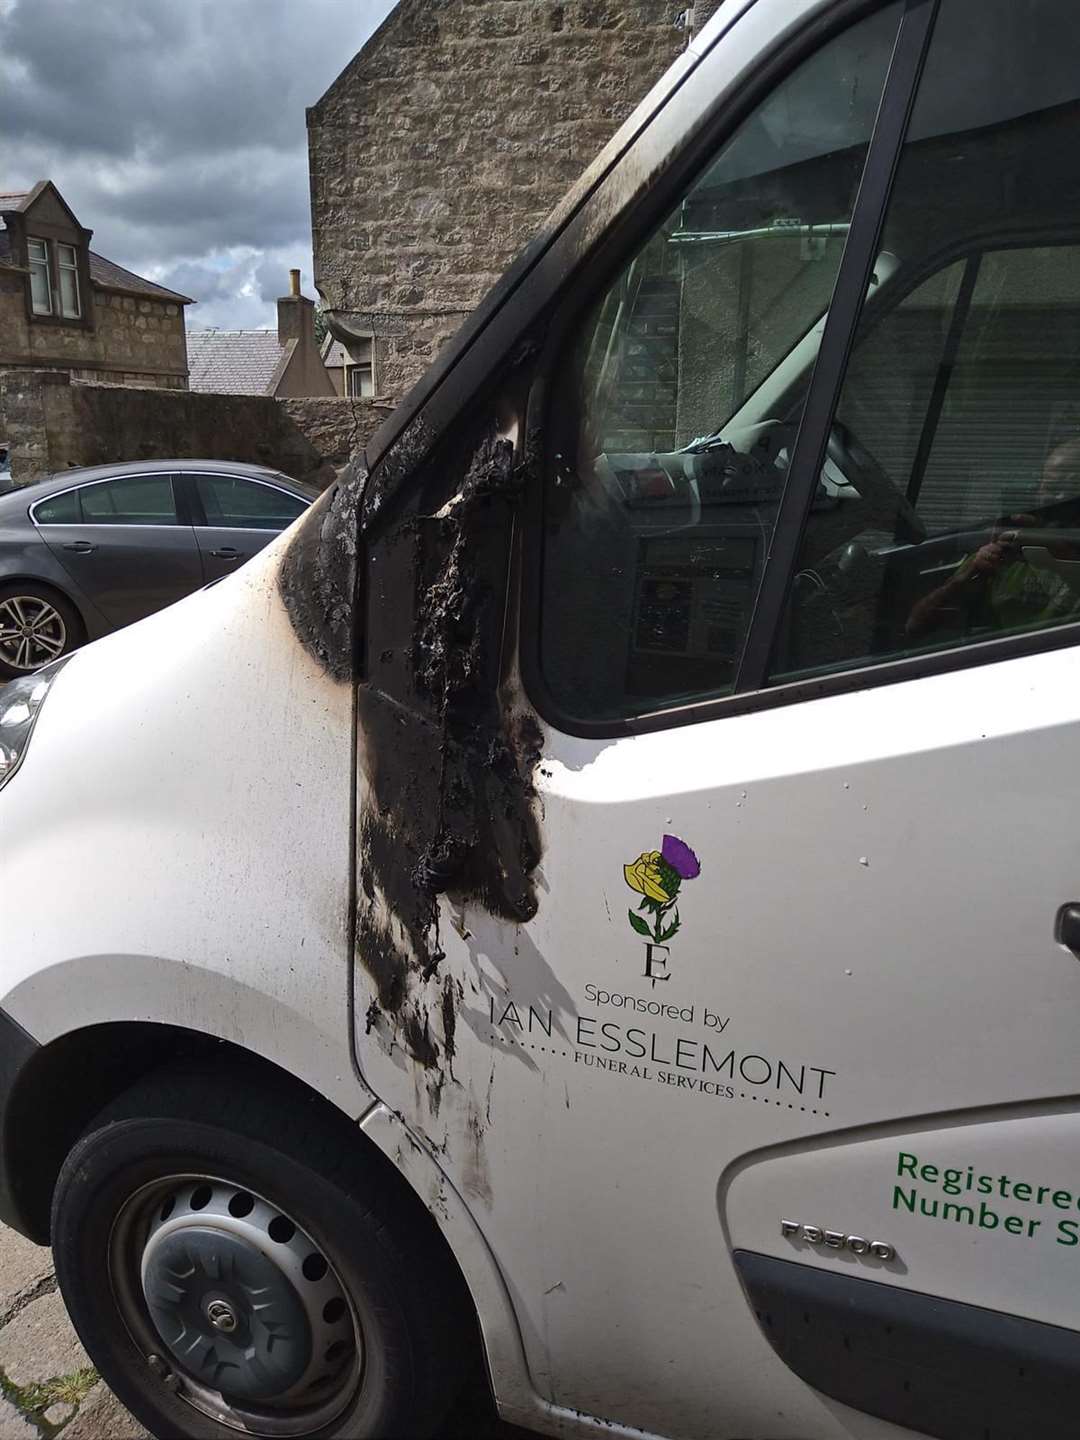 Bargain Box's delivery van after it was damaged in a wilful act of fire-raising in August.